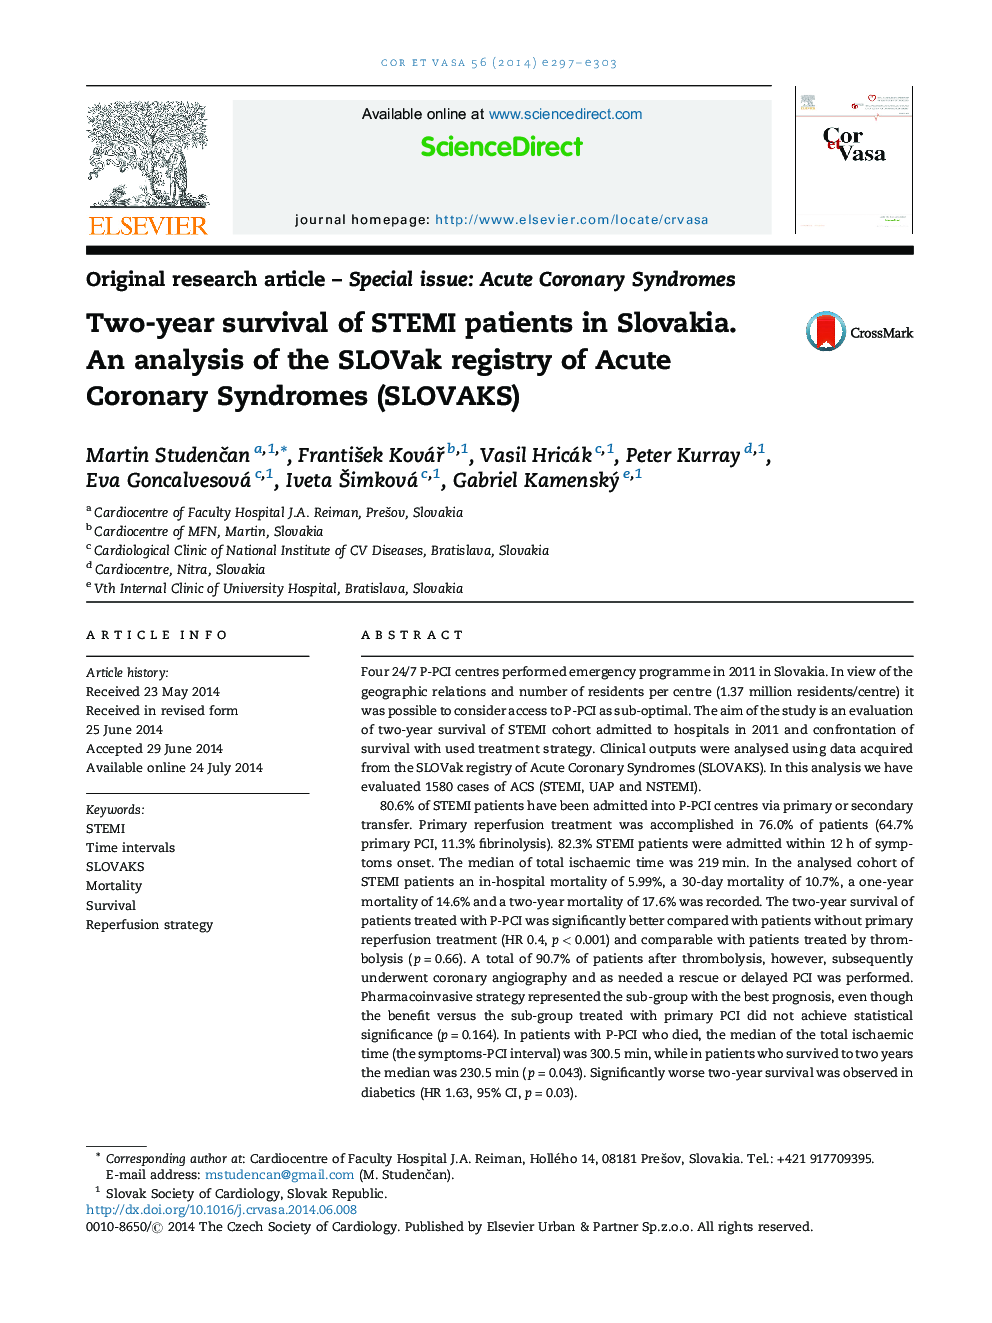 Two-year survival of STEMI patients in Slovakia. An analysis of the SLOVak registry of Acute Coronary Syndromes (SLOVAKS)